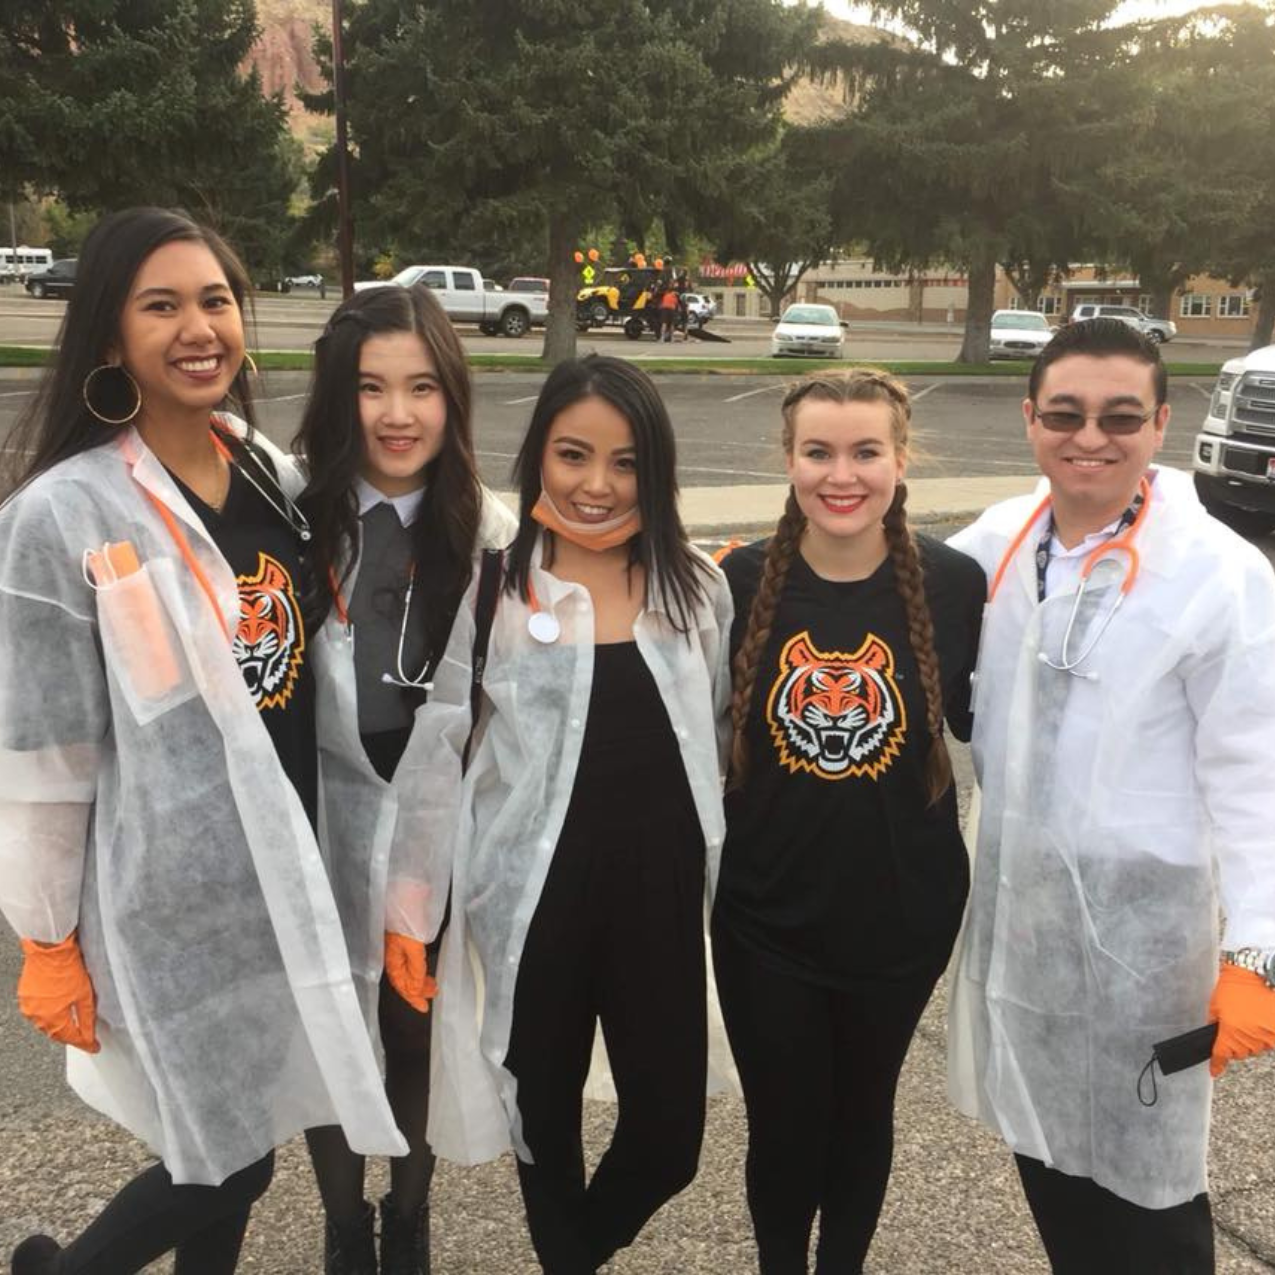 5 students in bengal shirts and lab coats stand outside posing for a picture together